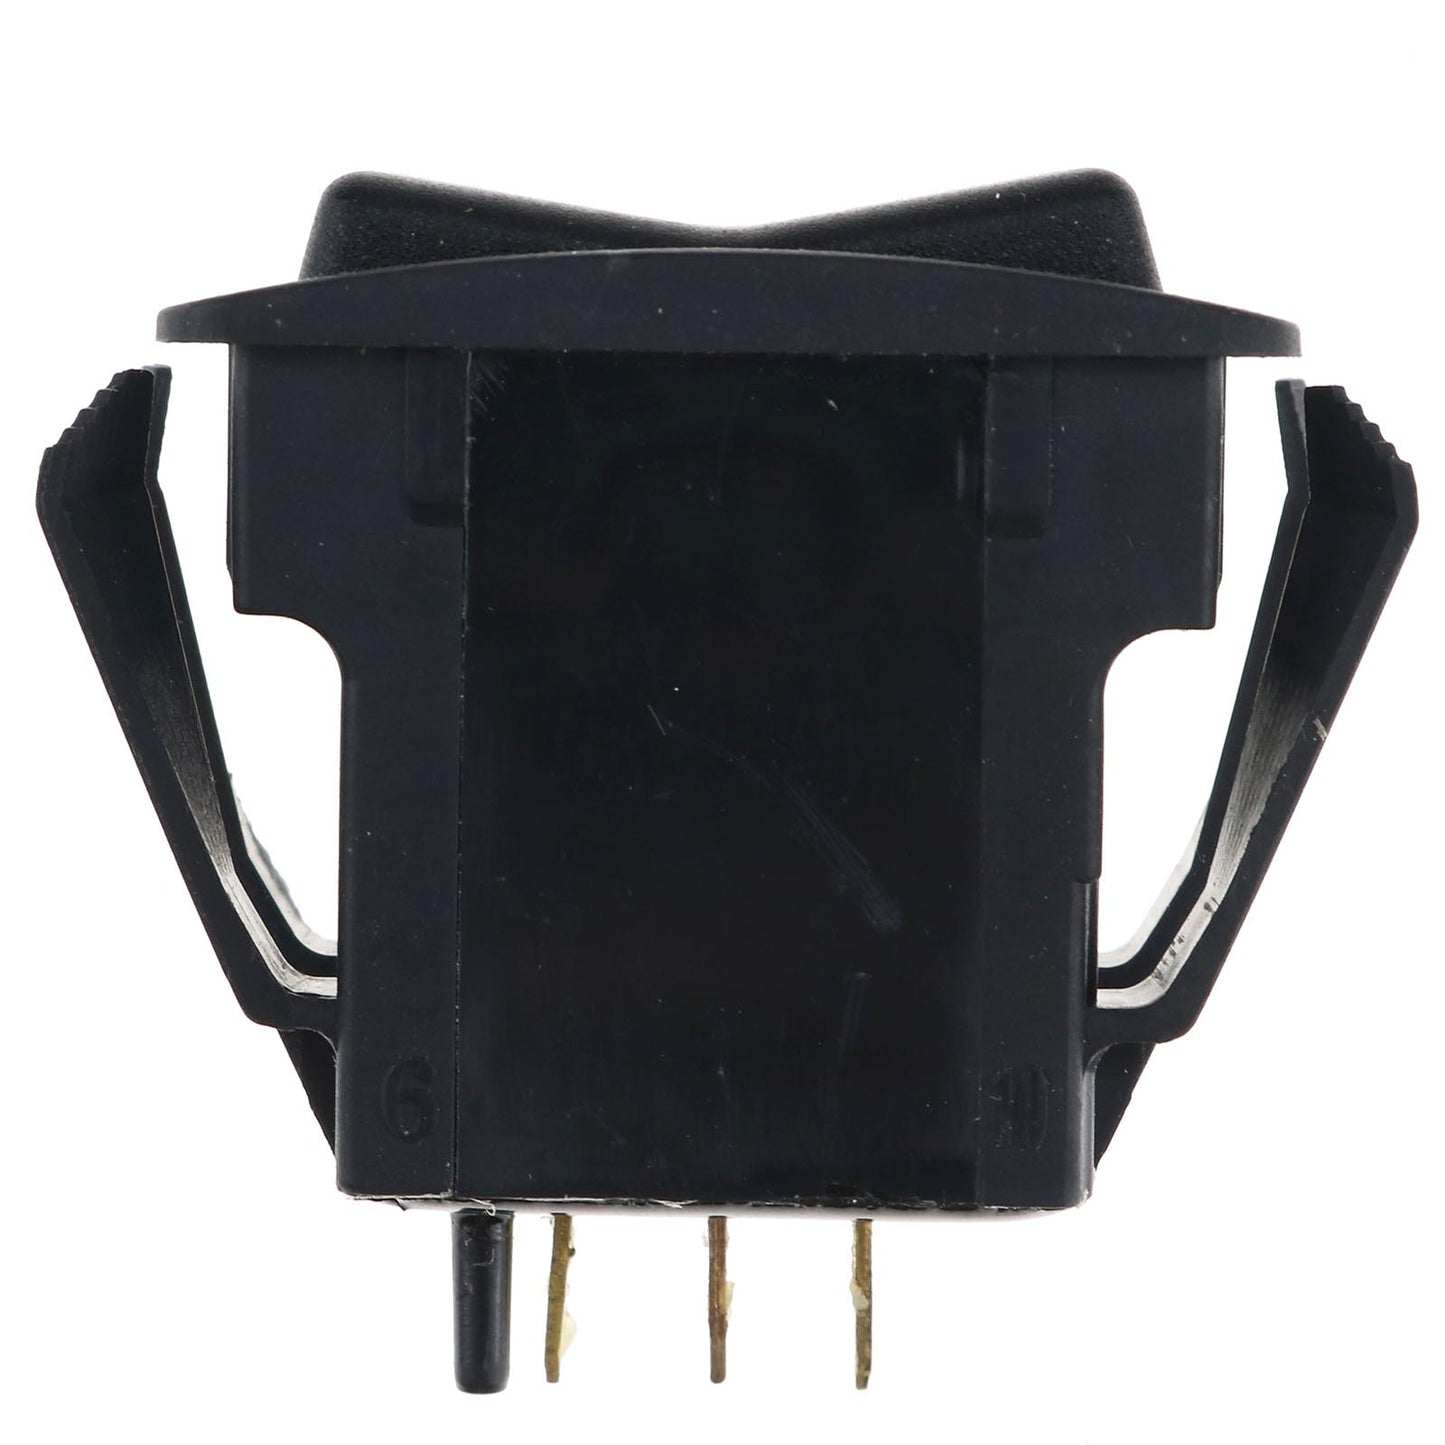 New 74323-G01 74323G01 Forward Reverse Rocker Switch Assembly Compatible with EZGO Electric 2003-Up TXT PDS Golf Carts